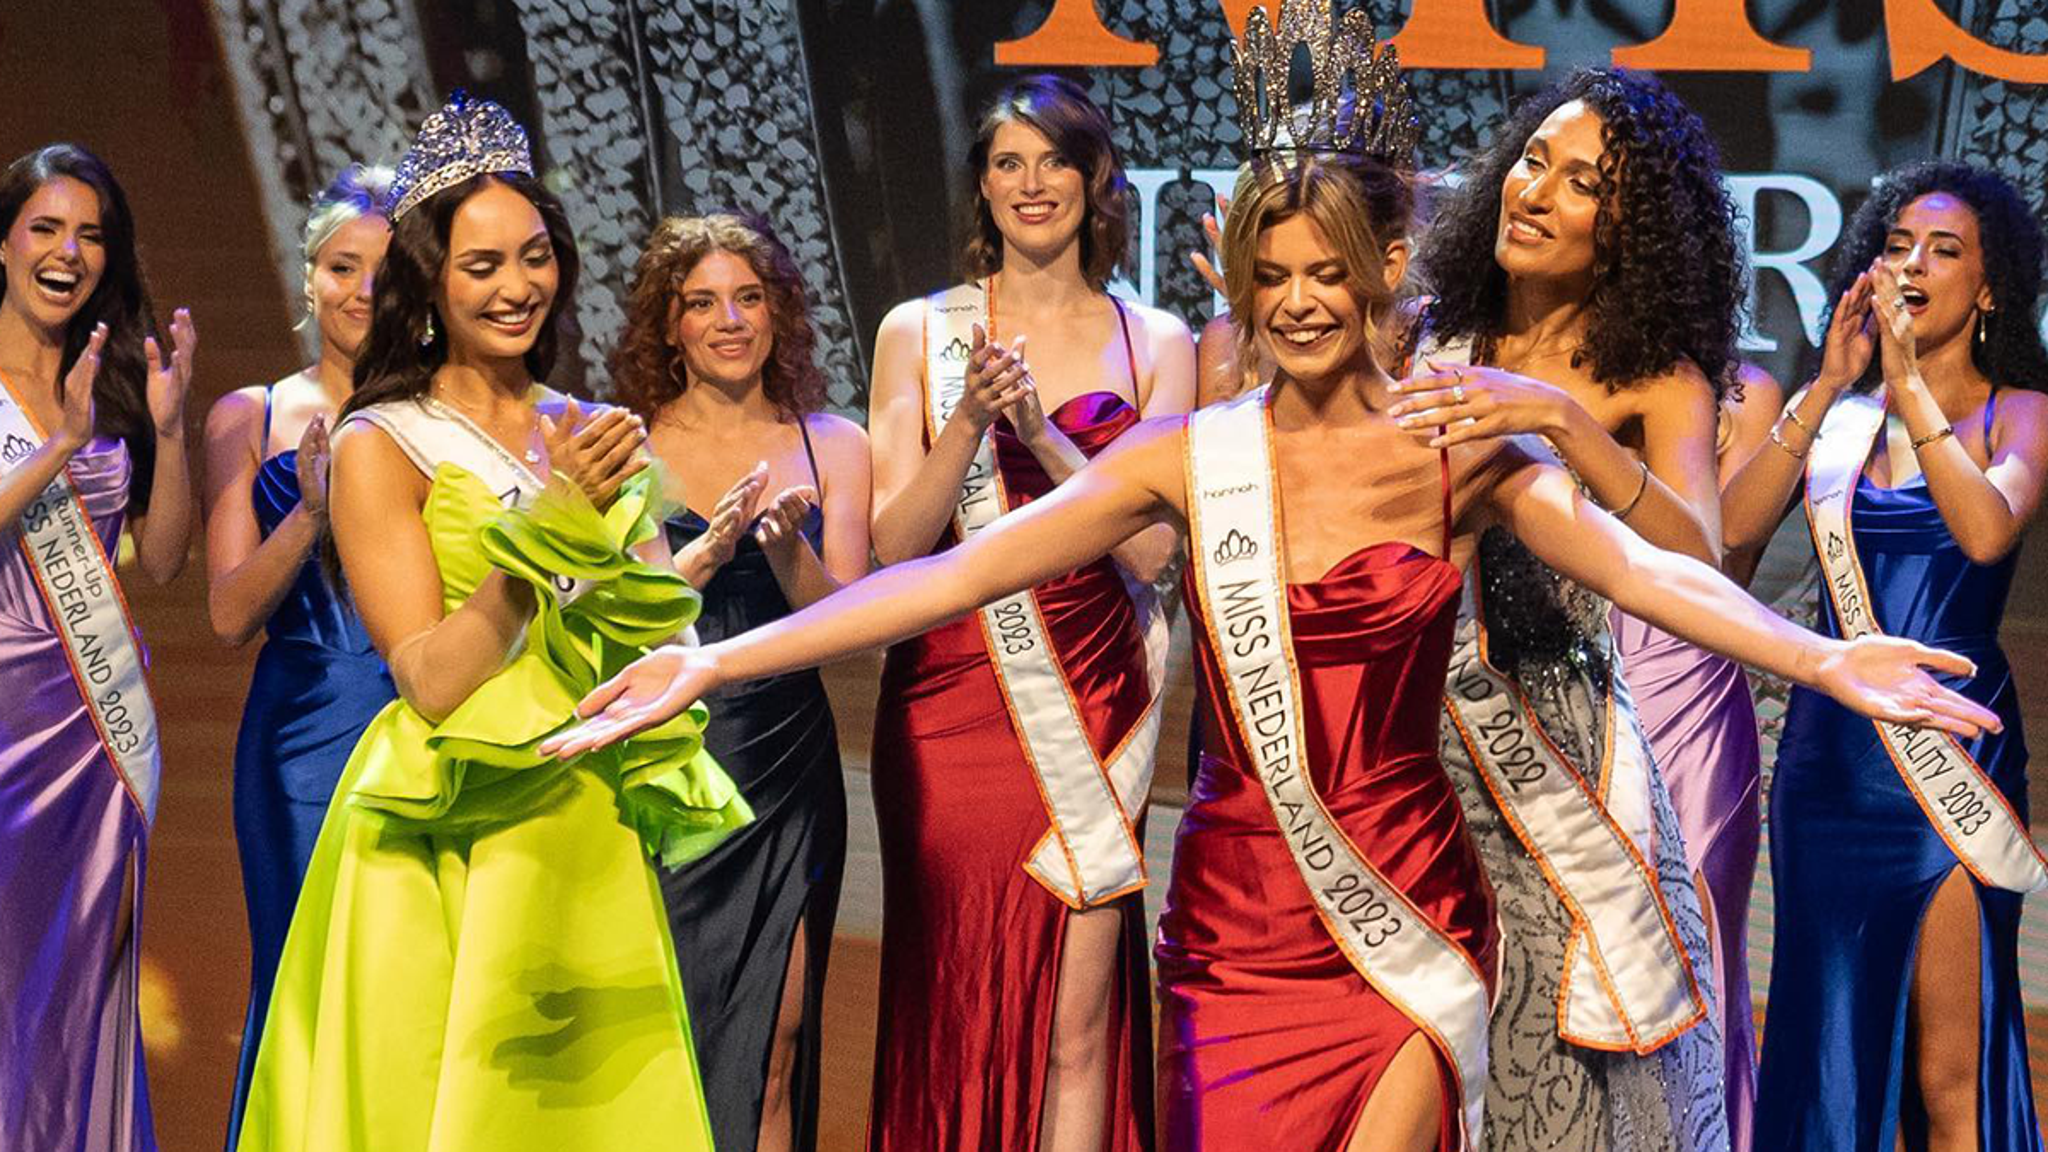 Miss Universe Netherlands crowns a transgender woman for the first time